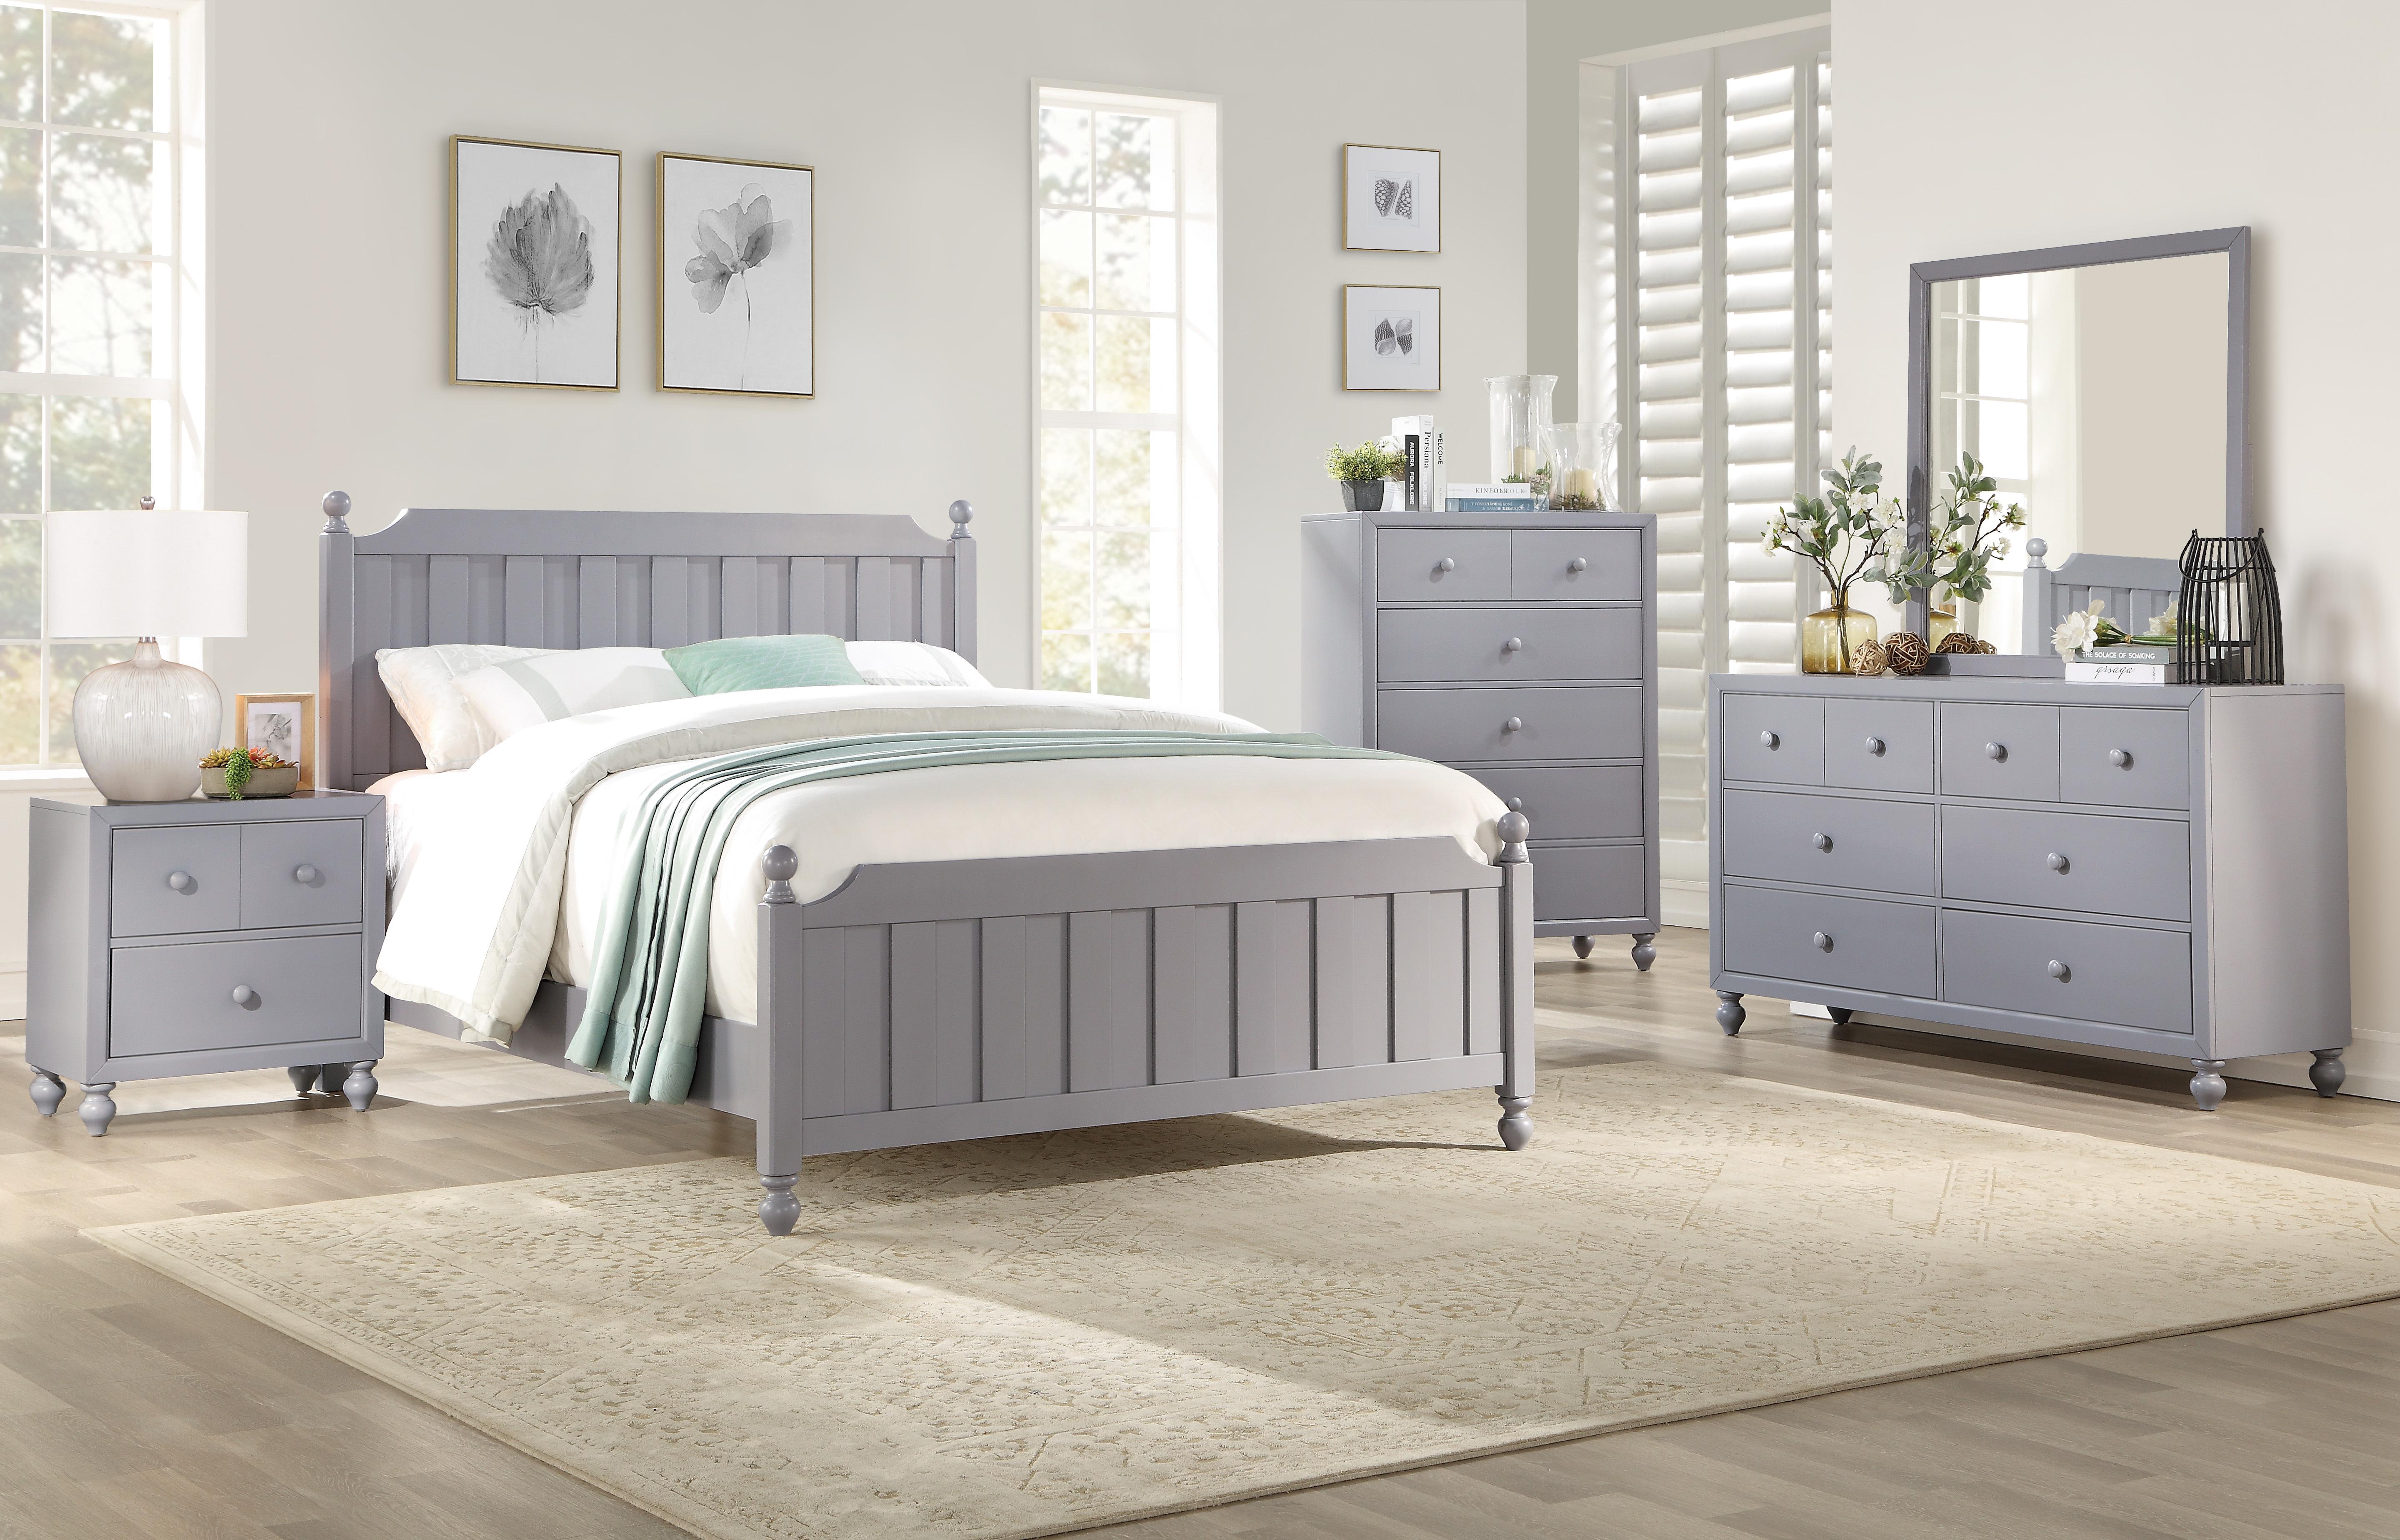 Modern Bedroom Set 1803GY-1-6PC Wellsummer 1803GY-1-6PC in Gray 